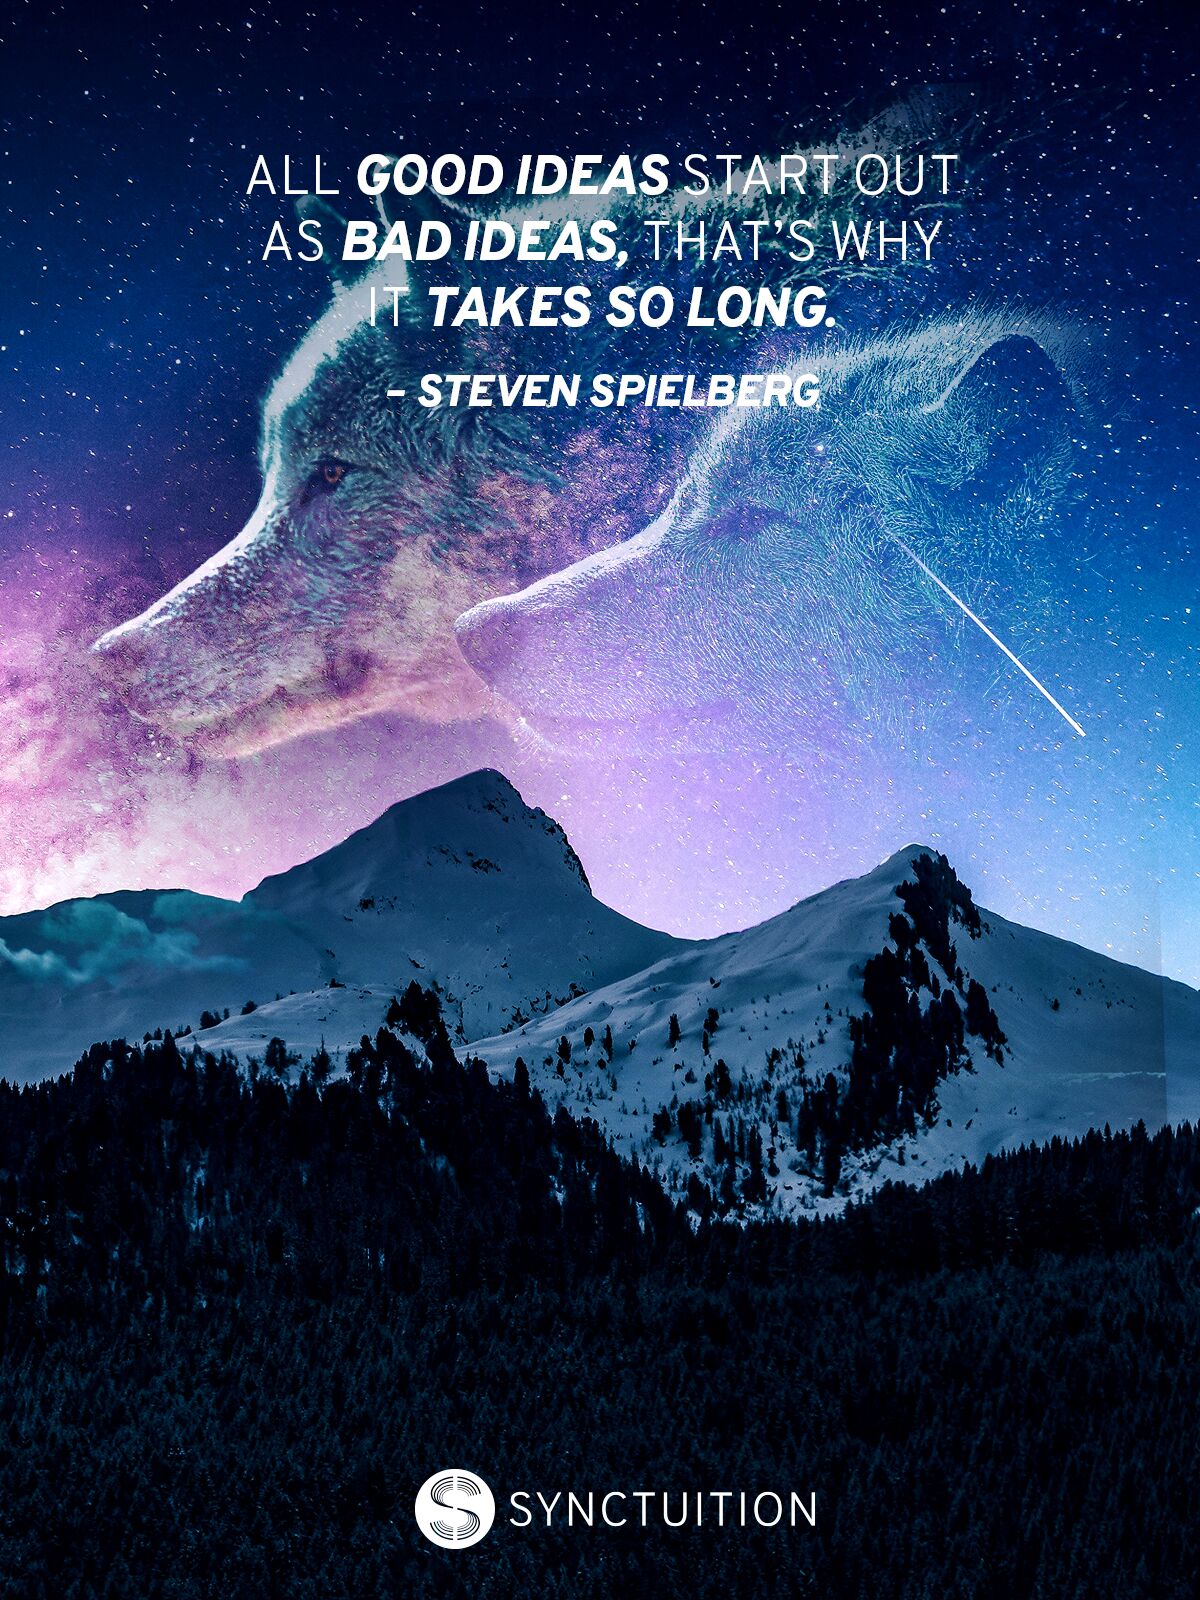 Quote of Steven Spielberg on good ideas on a magical realism scene